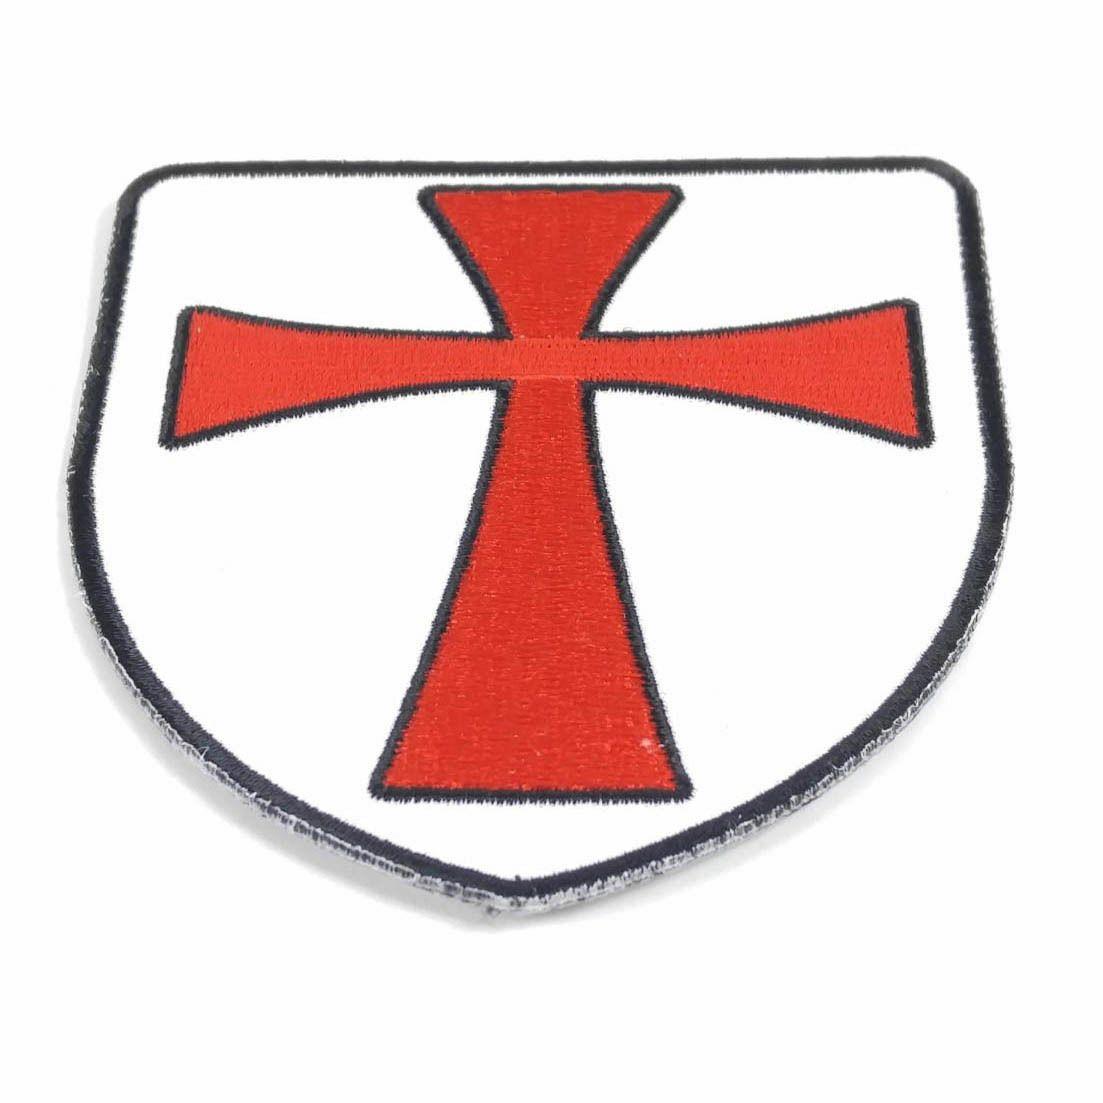 Red Cross and Shield Logo - Embroidered Knights Templar Shield Red Cross Sew or Iron on Patch